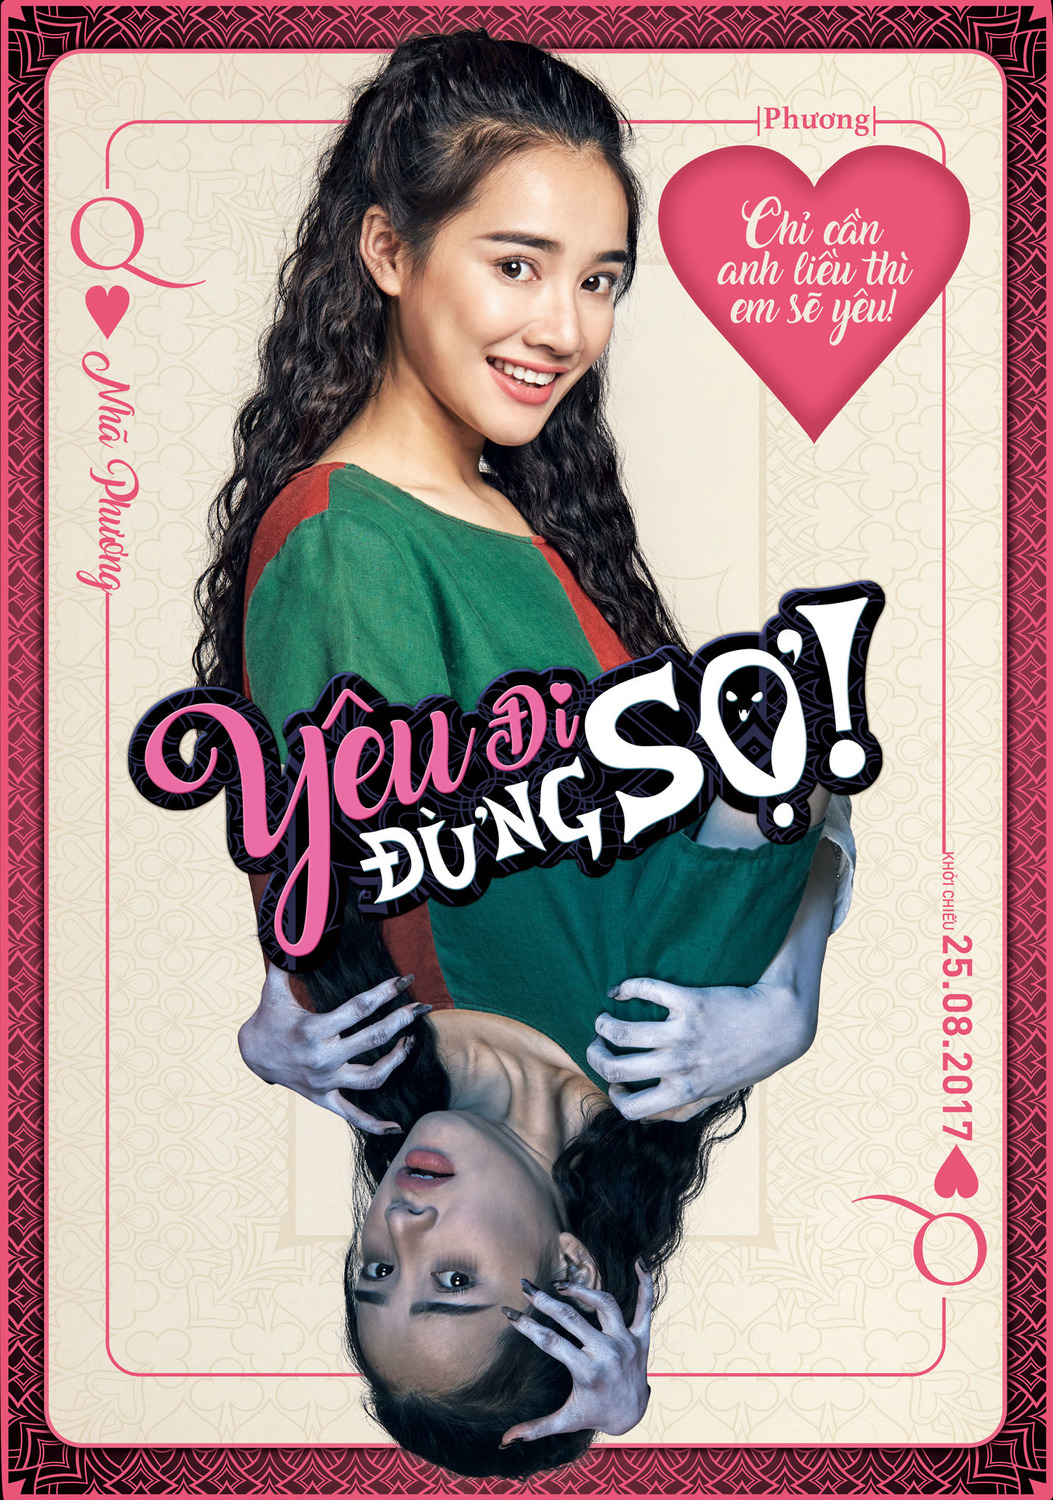 Extra Large Movie Poster Image for Yeu Di, Dung So! (#3 of 7)